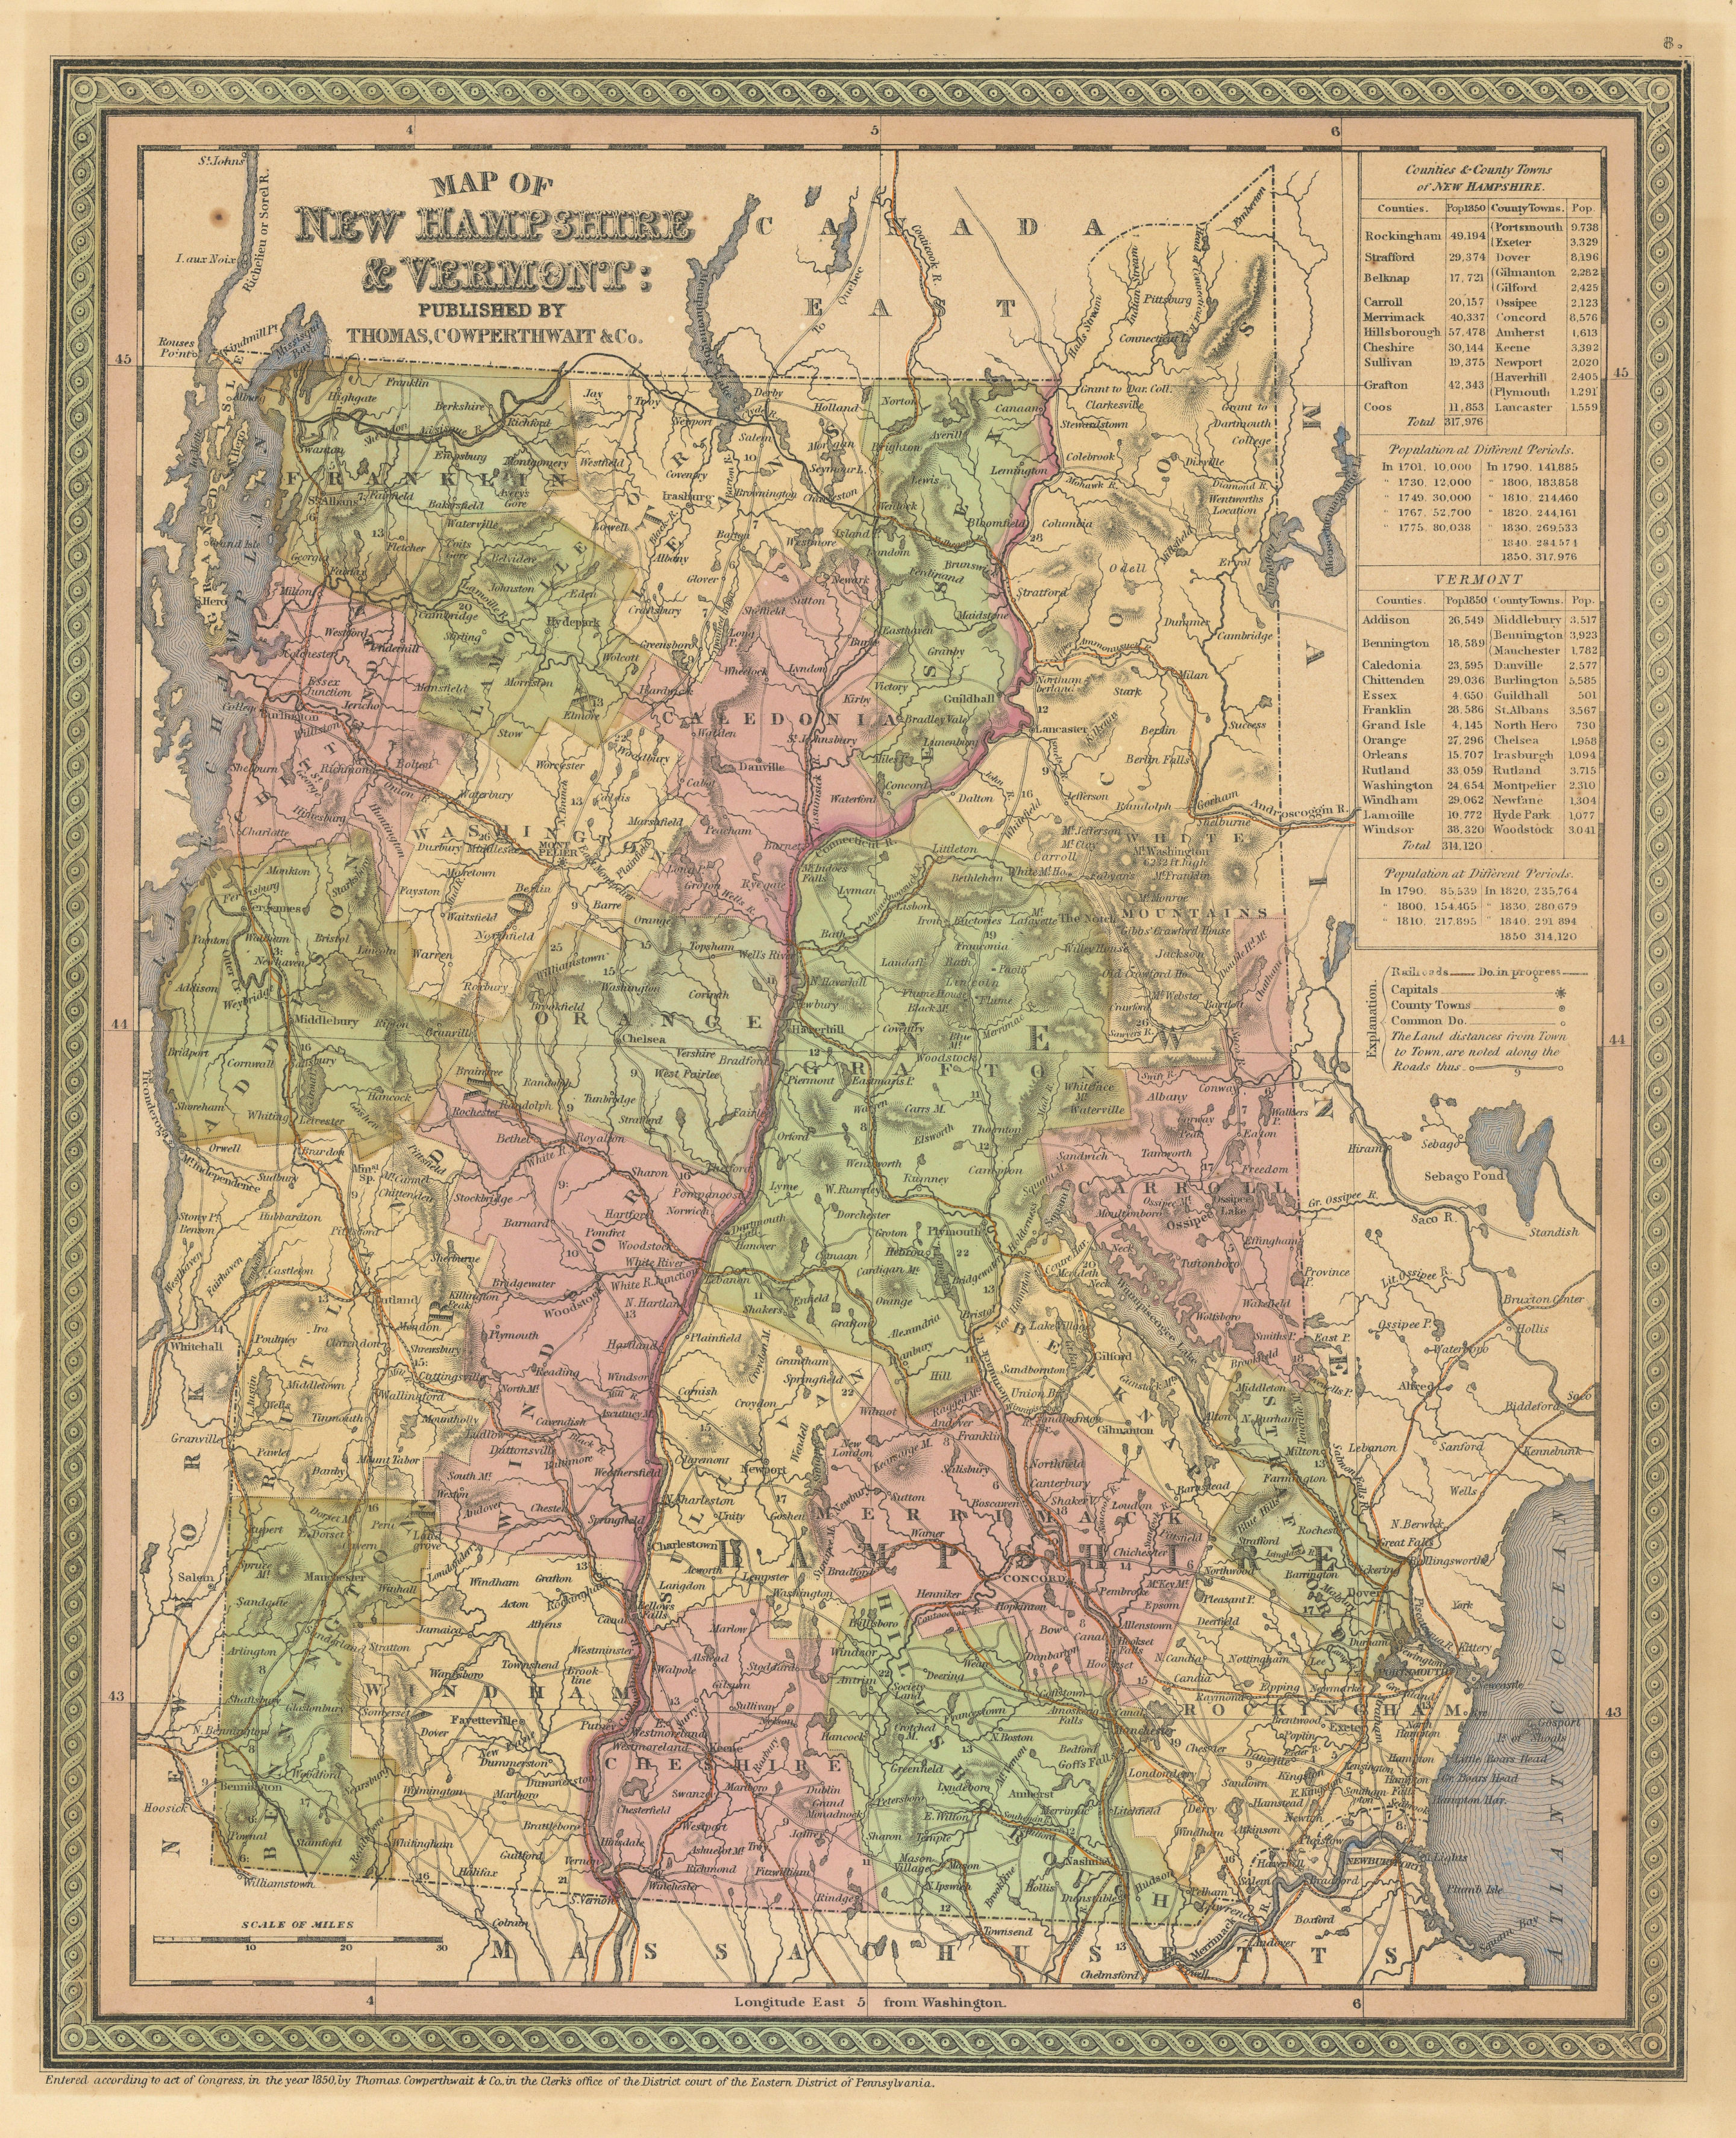 Associate Product Map of New Hampshire & Vermont. State map with counties. COWPERTHWAIT 1852